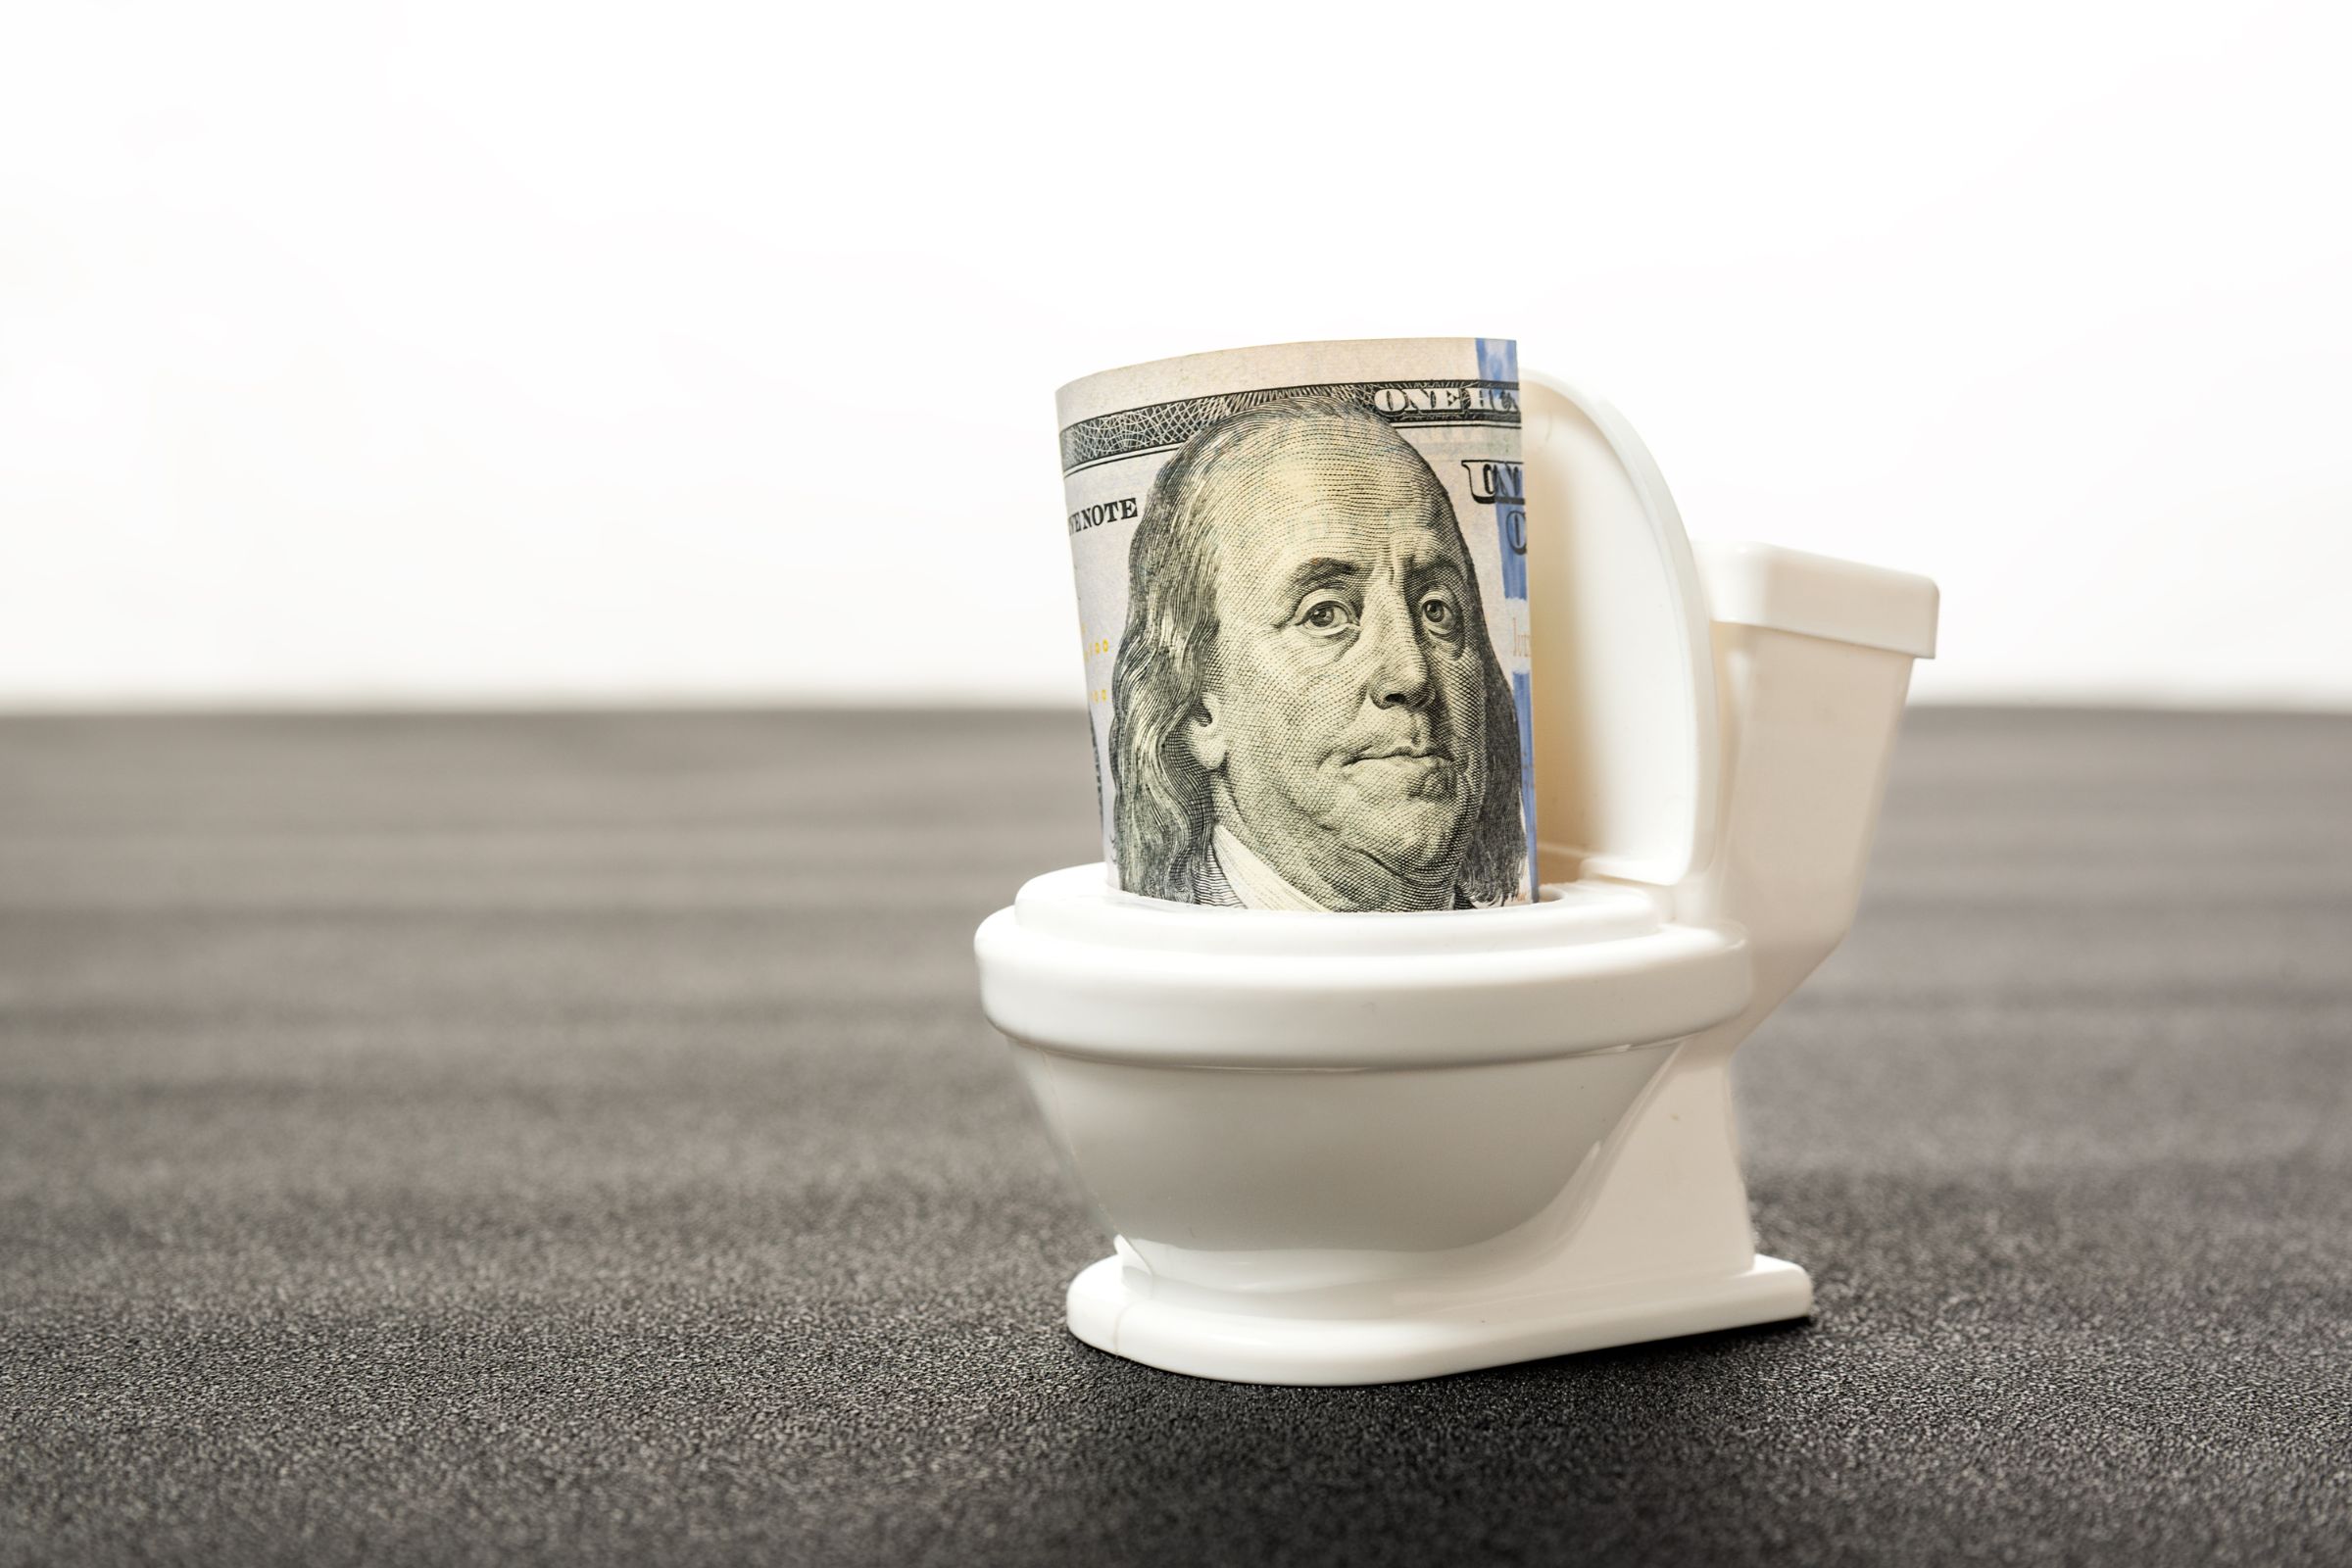 How Much Does It Cost to Add a Bathroom?